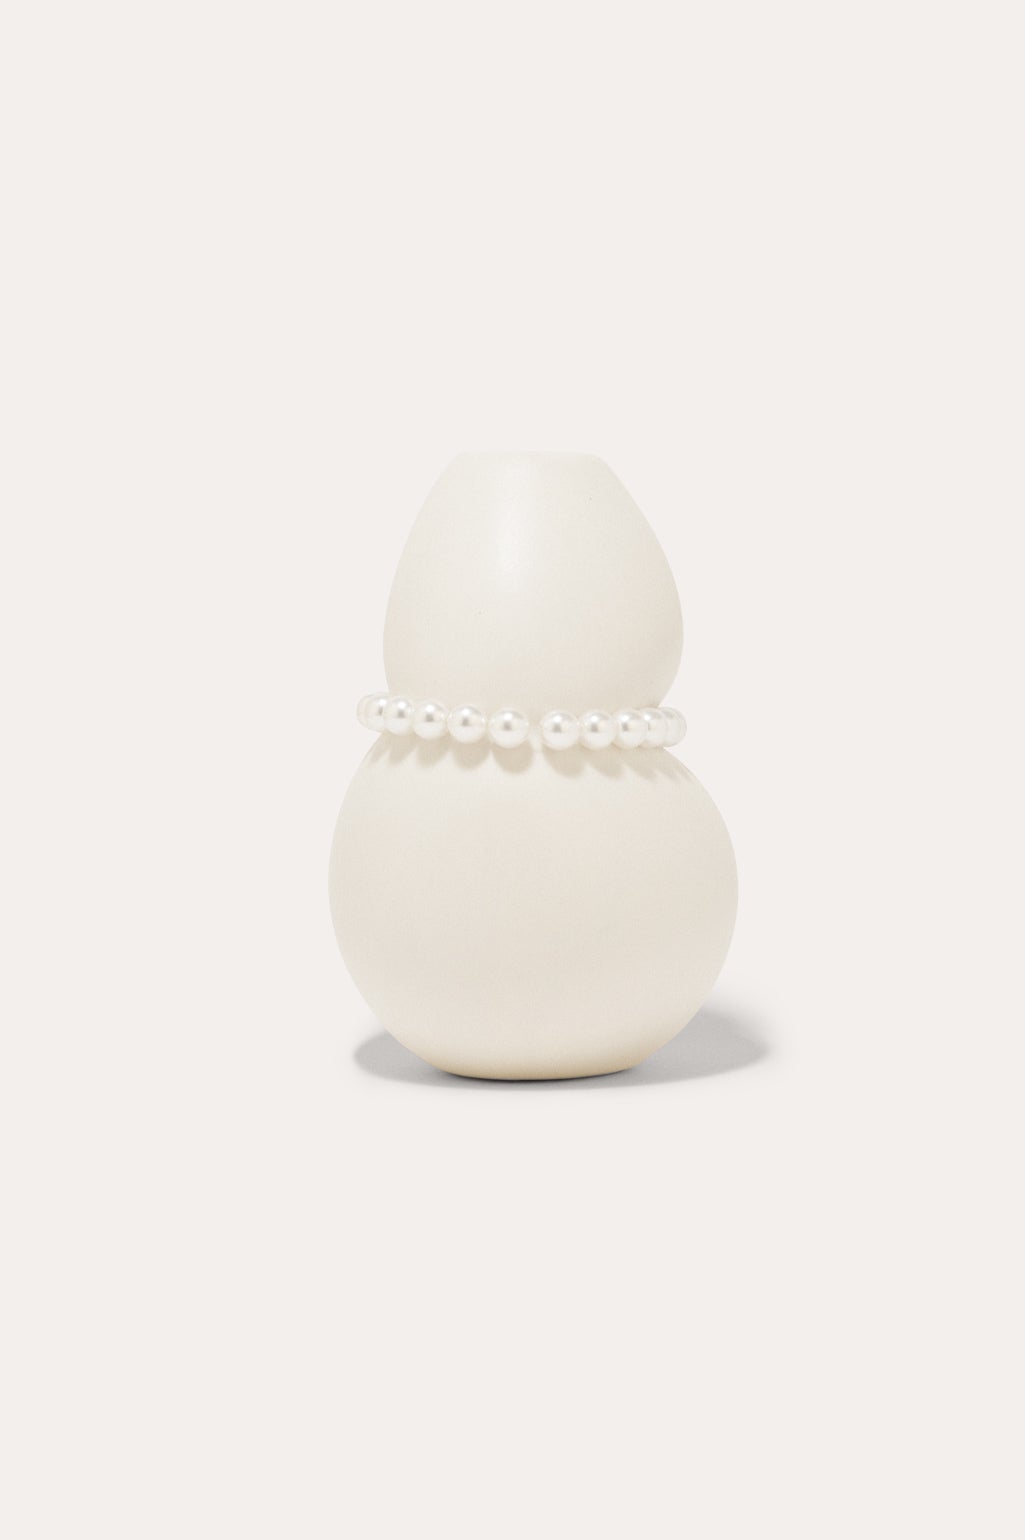 Squeezed - Small Vase in Matte White w/ Faux Pearls | Completedworks